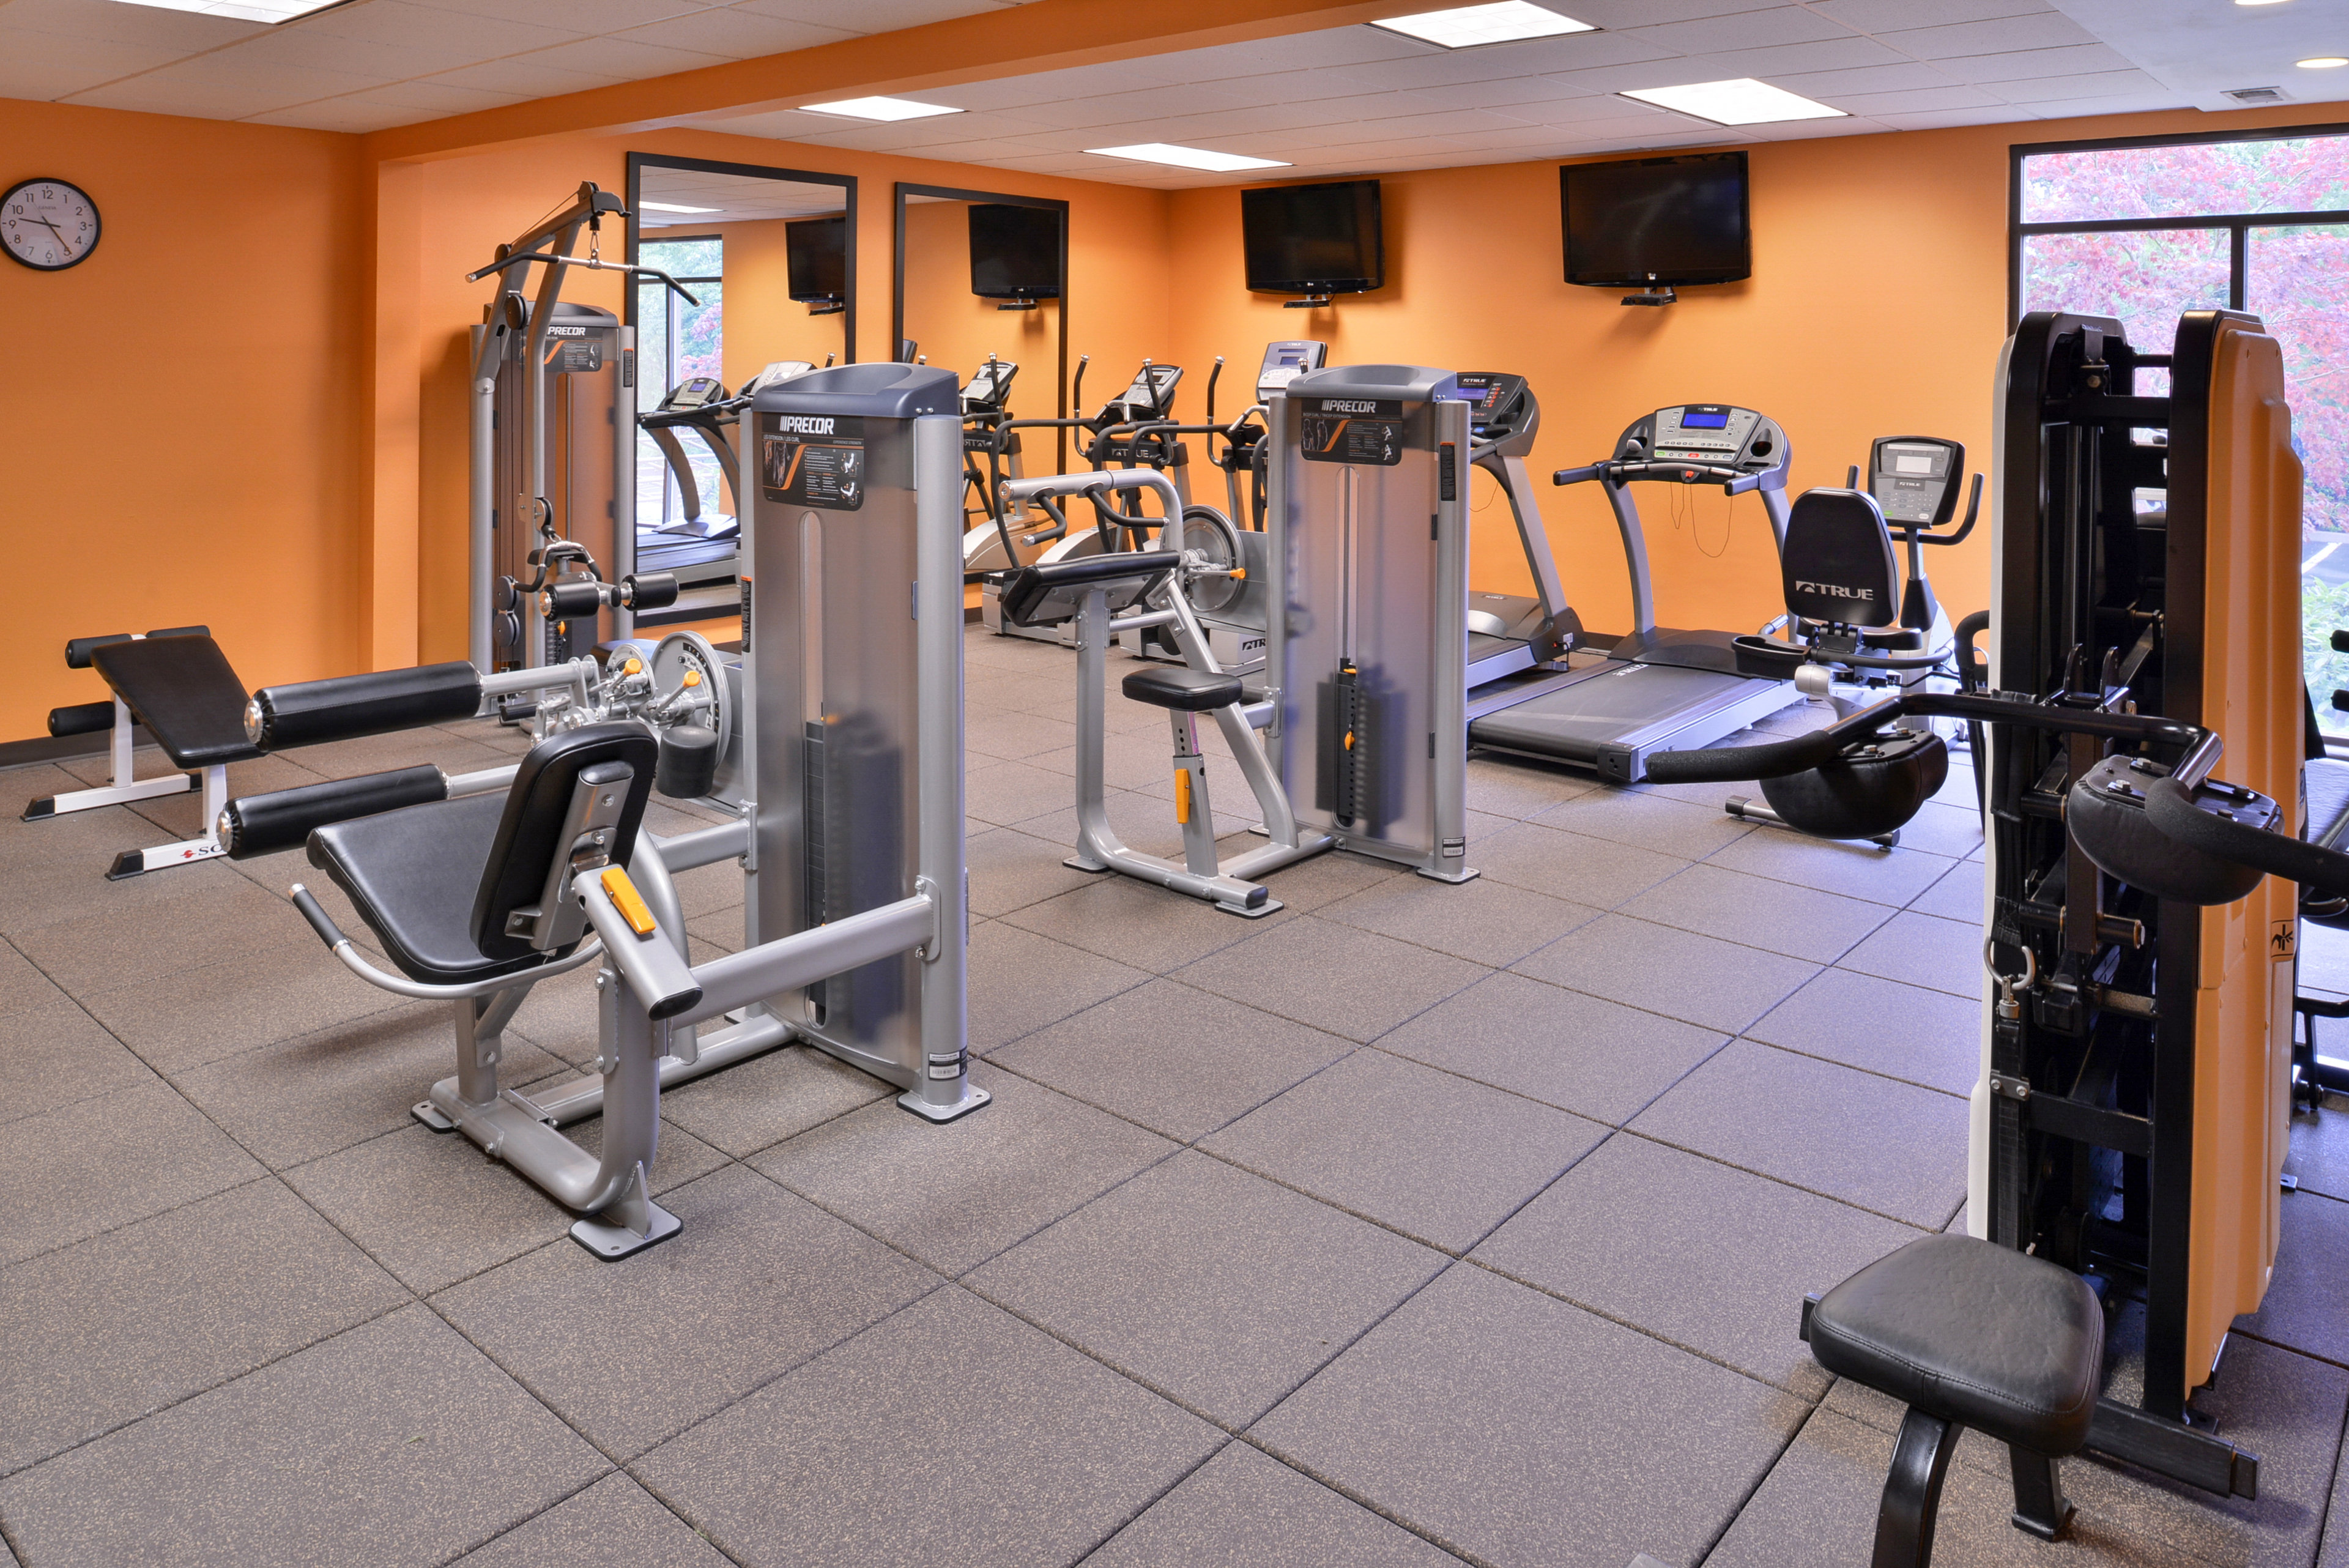 Stay Healthy in our fitness room